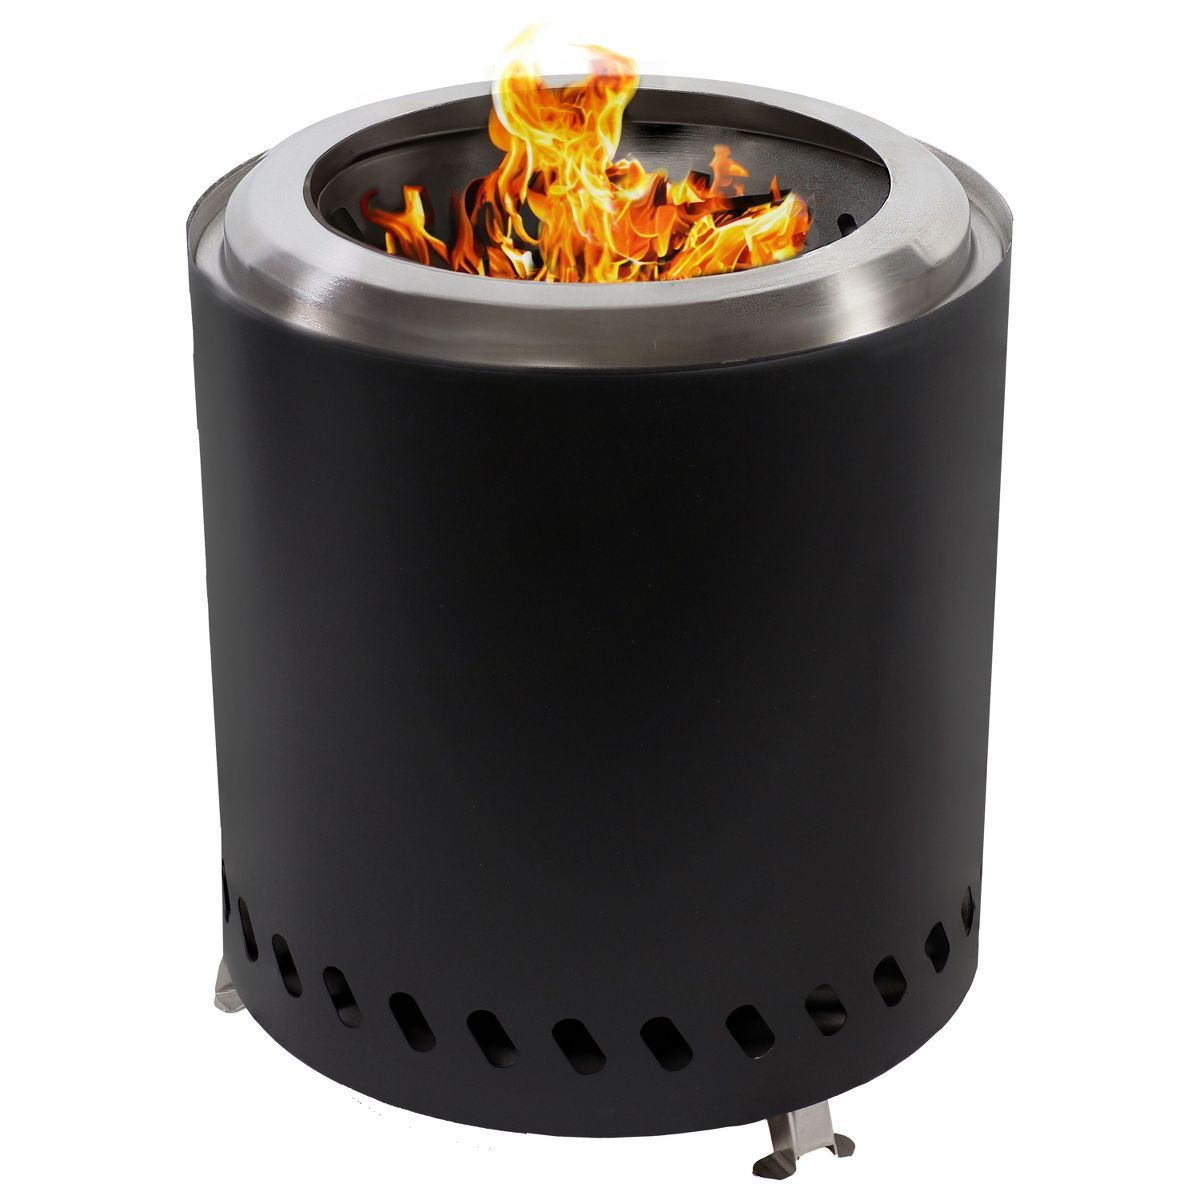 Sunnydaze Stainless Steel Tabletop Smokeless Fire Pit | Target